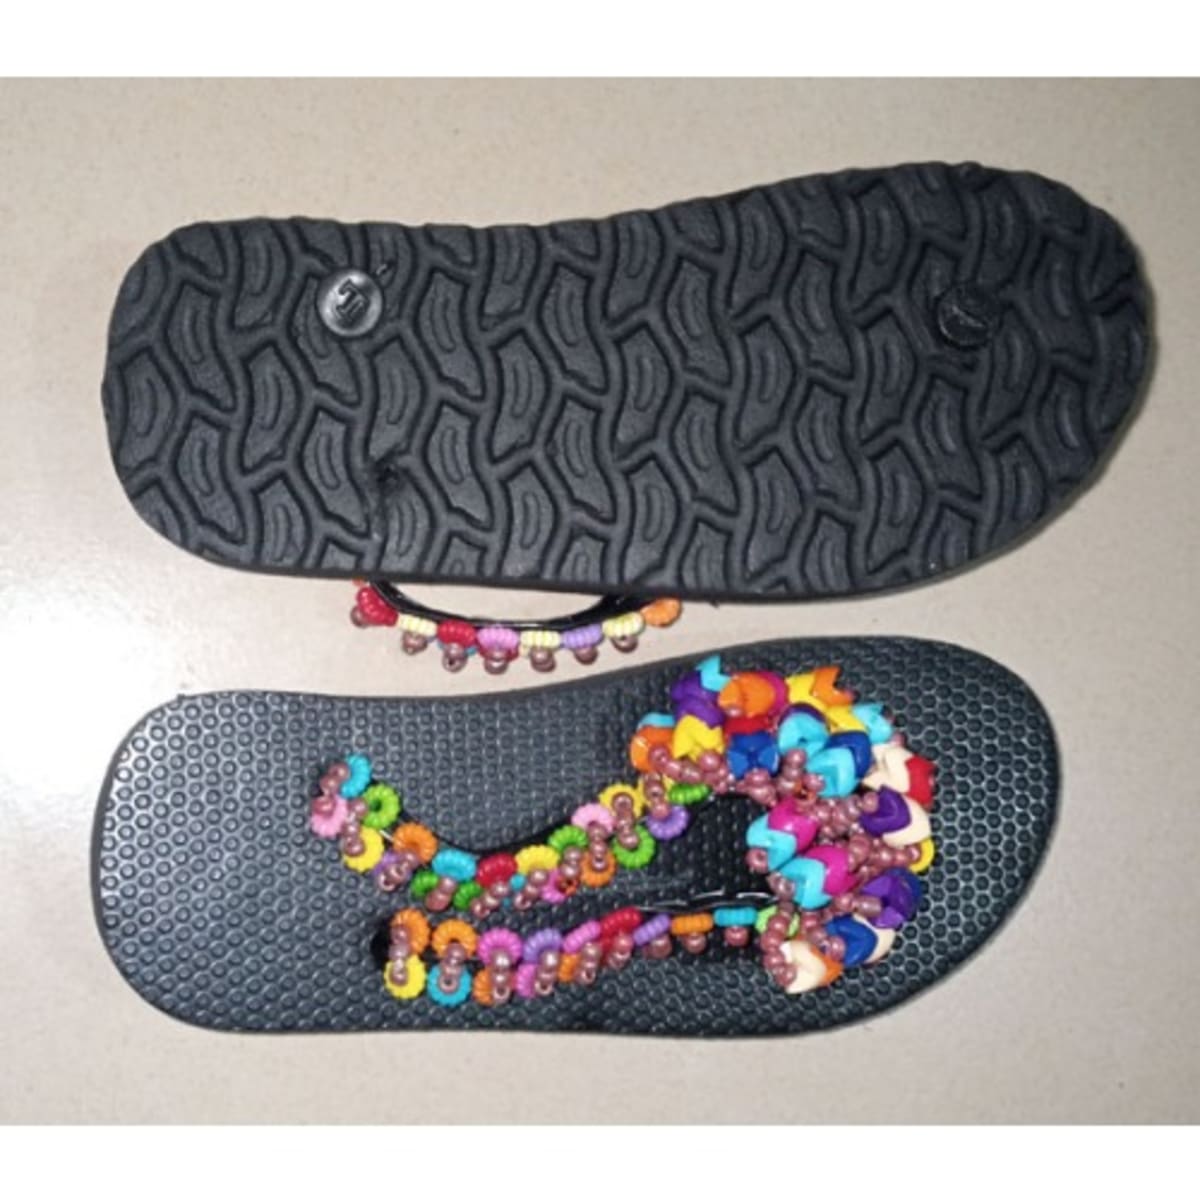 Update More Than 117 Beaded Sandals Made In Ghana Latest Vn